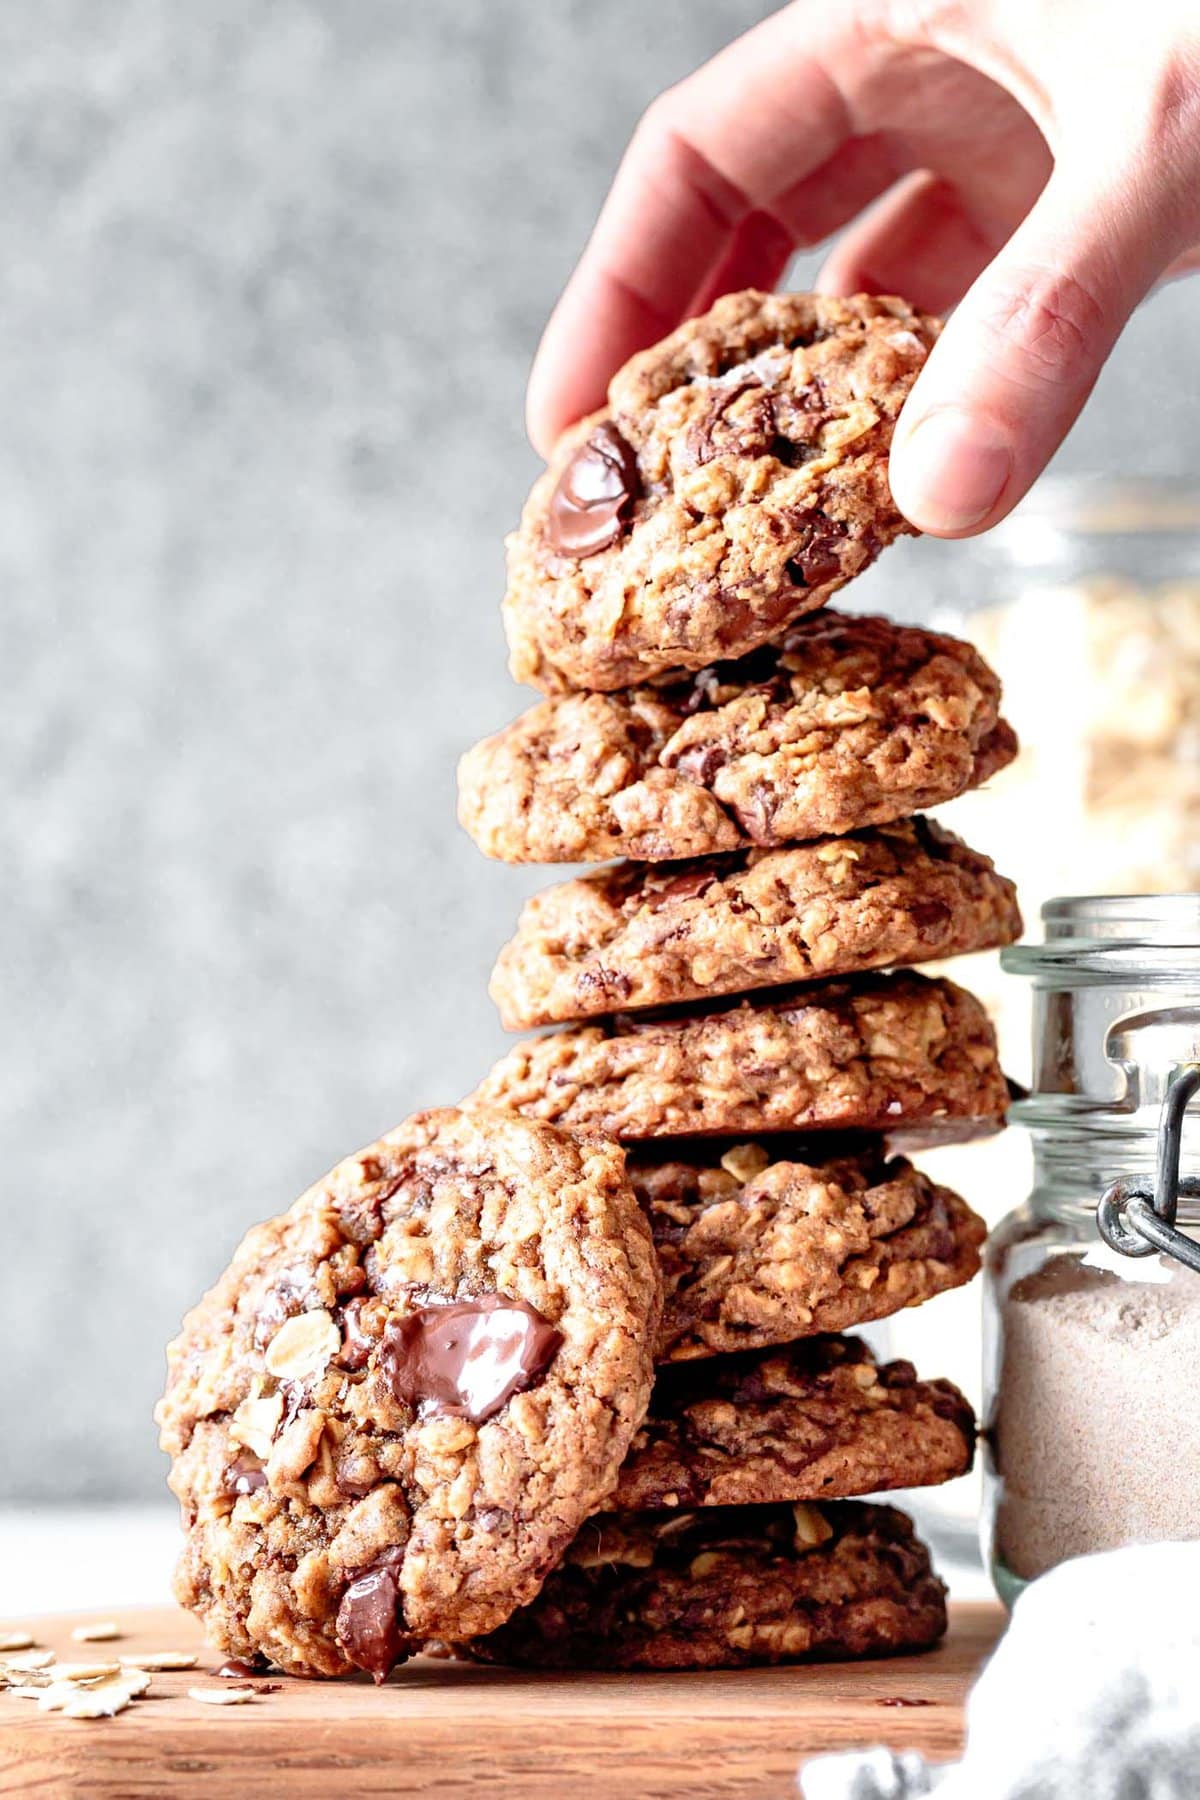 a hand is grabbing the top teff flour cookie from a stack of cookies made with gluten-free flours